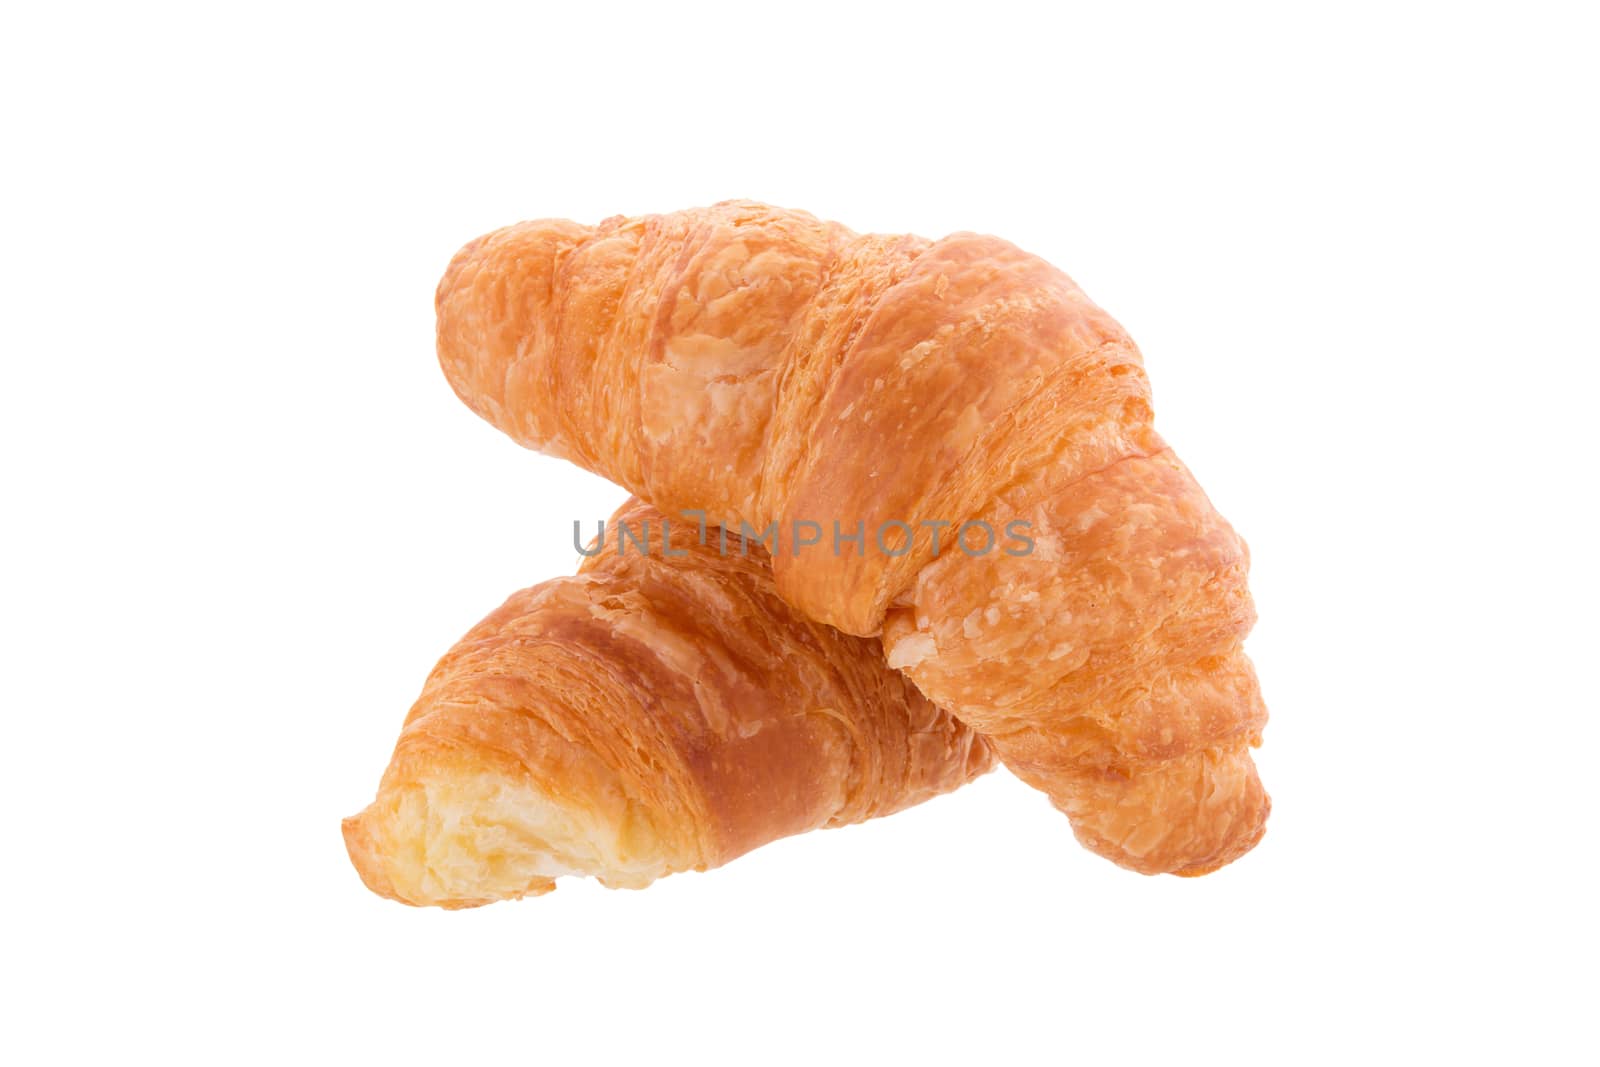 Freshly baked croissants isolated on a white background.